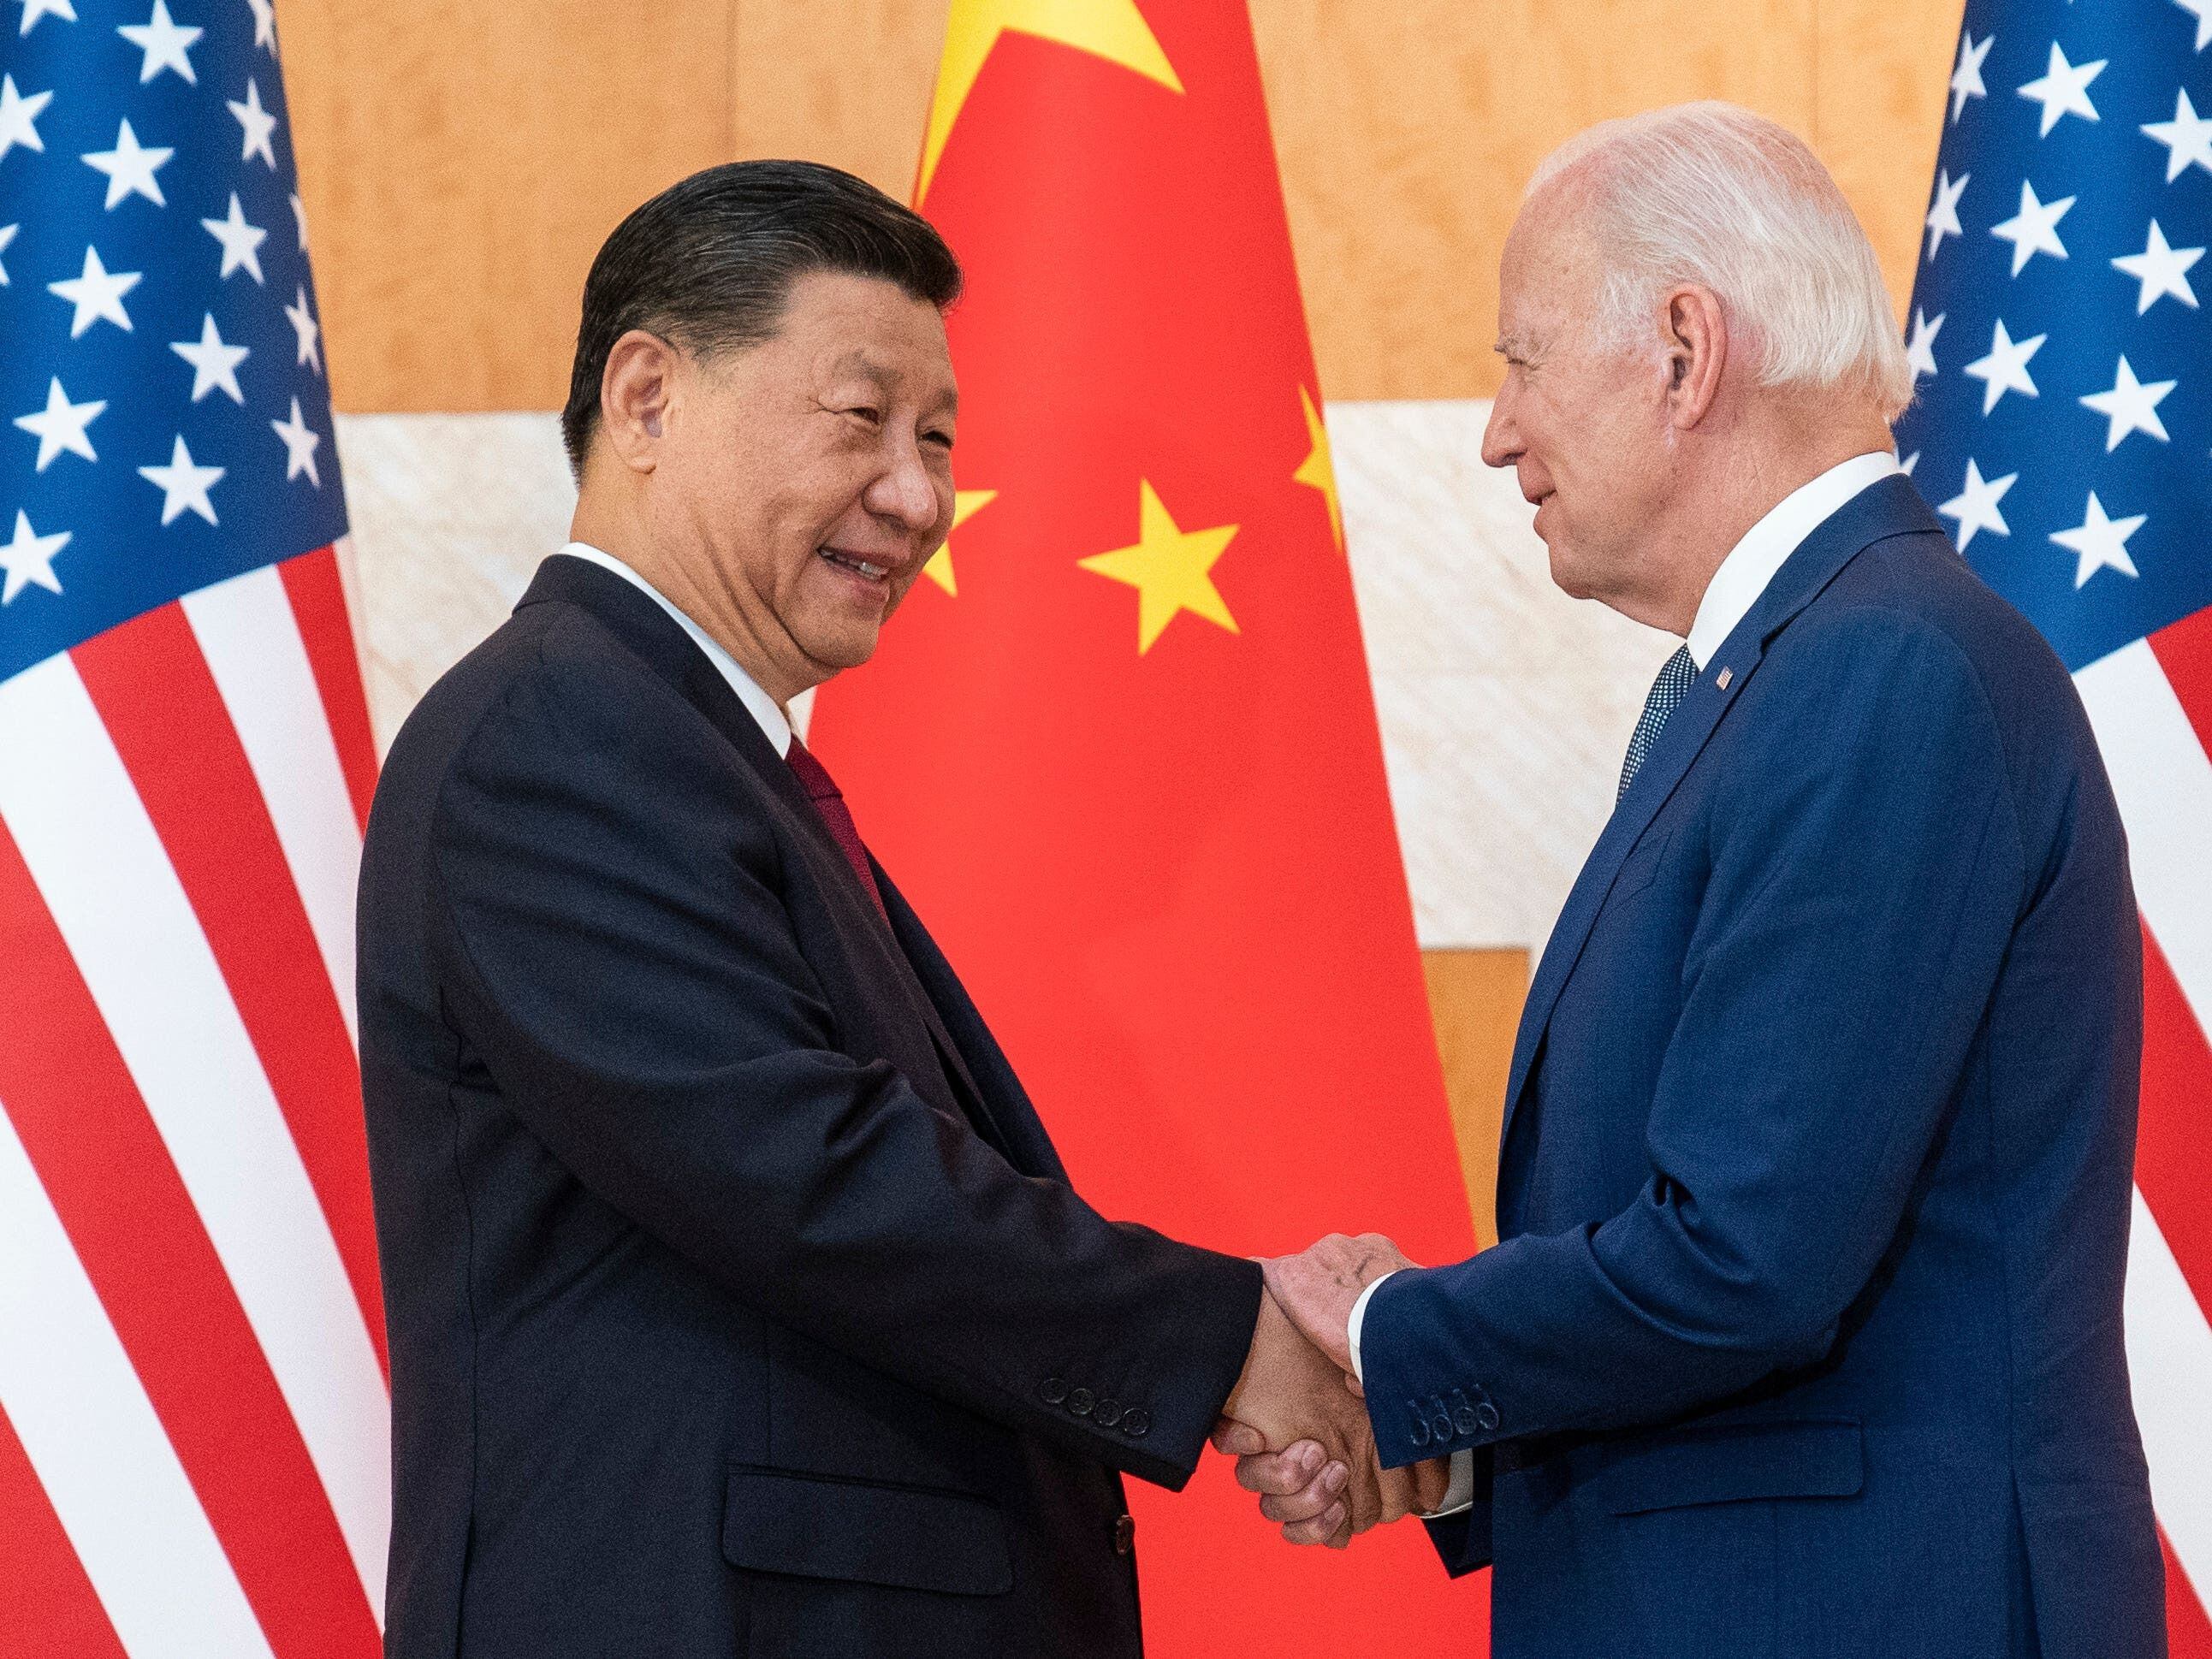 Biden and Xi agree to meet amid heightened tensions between US and China